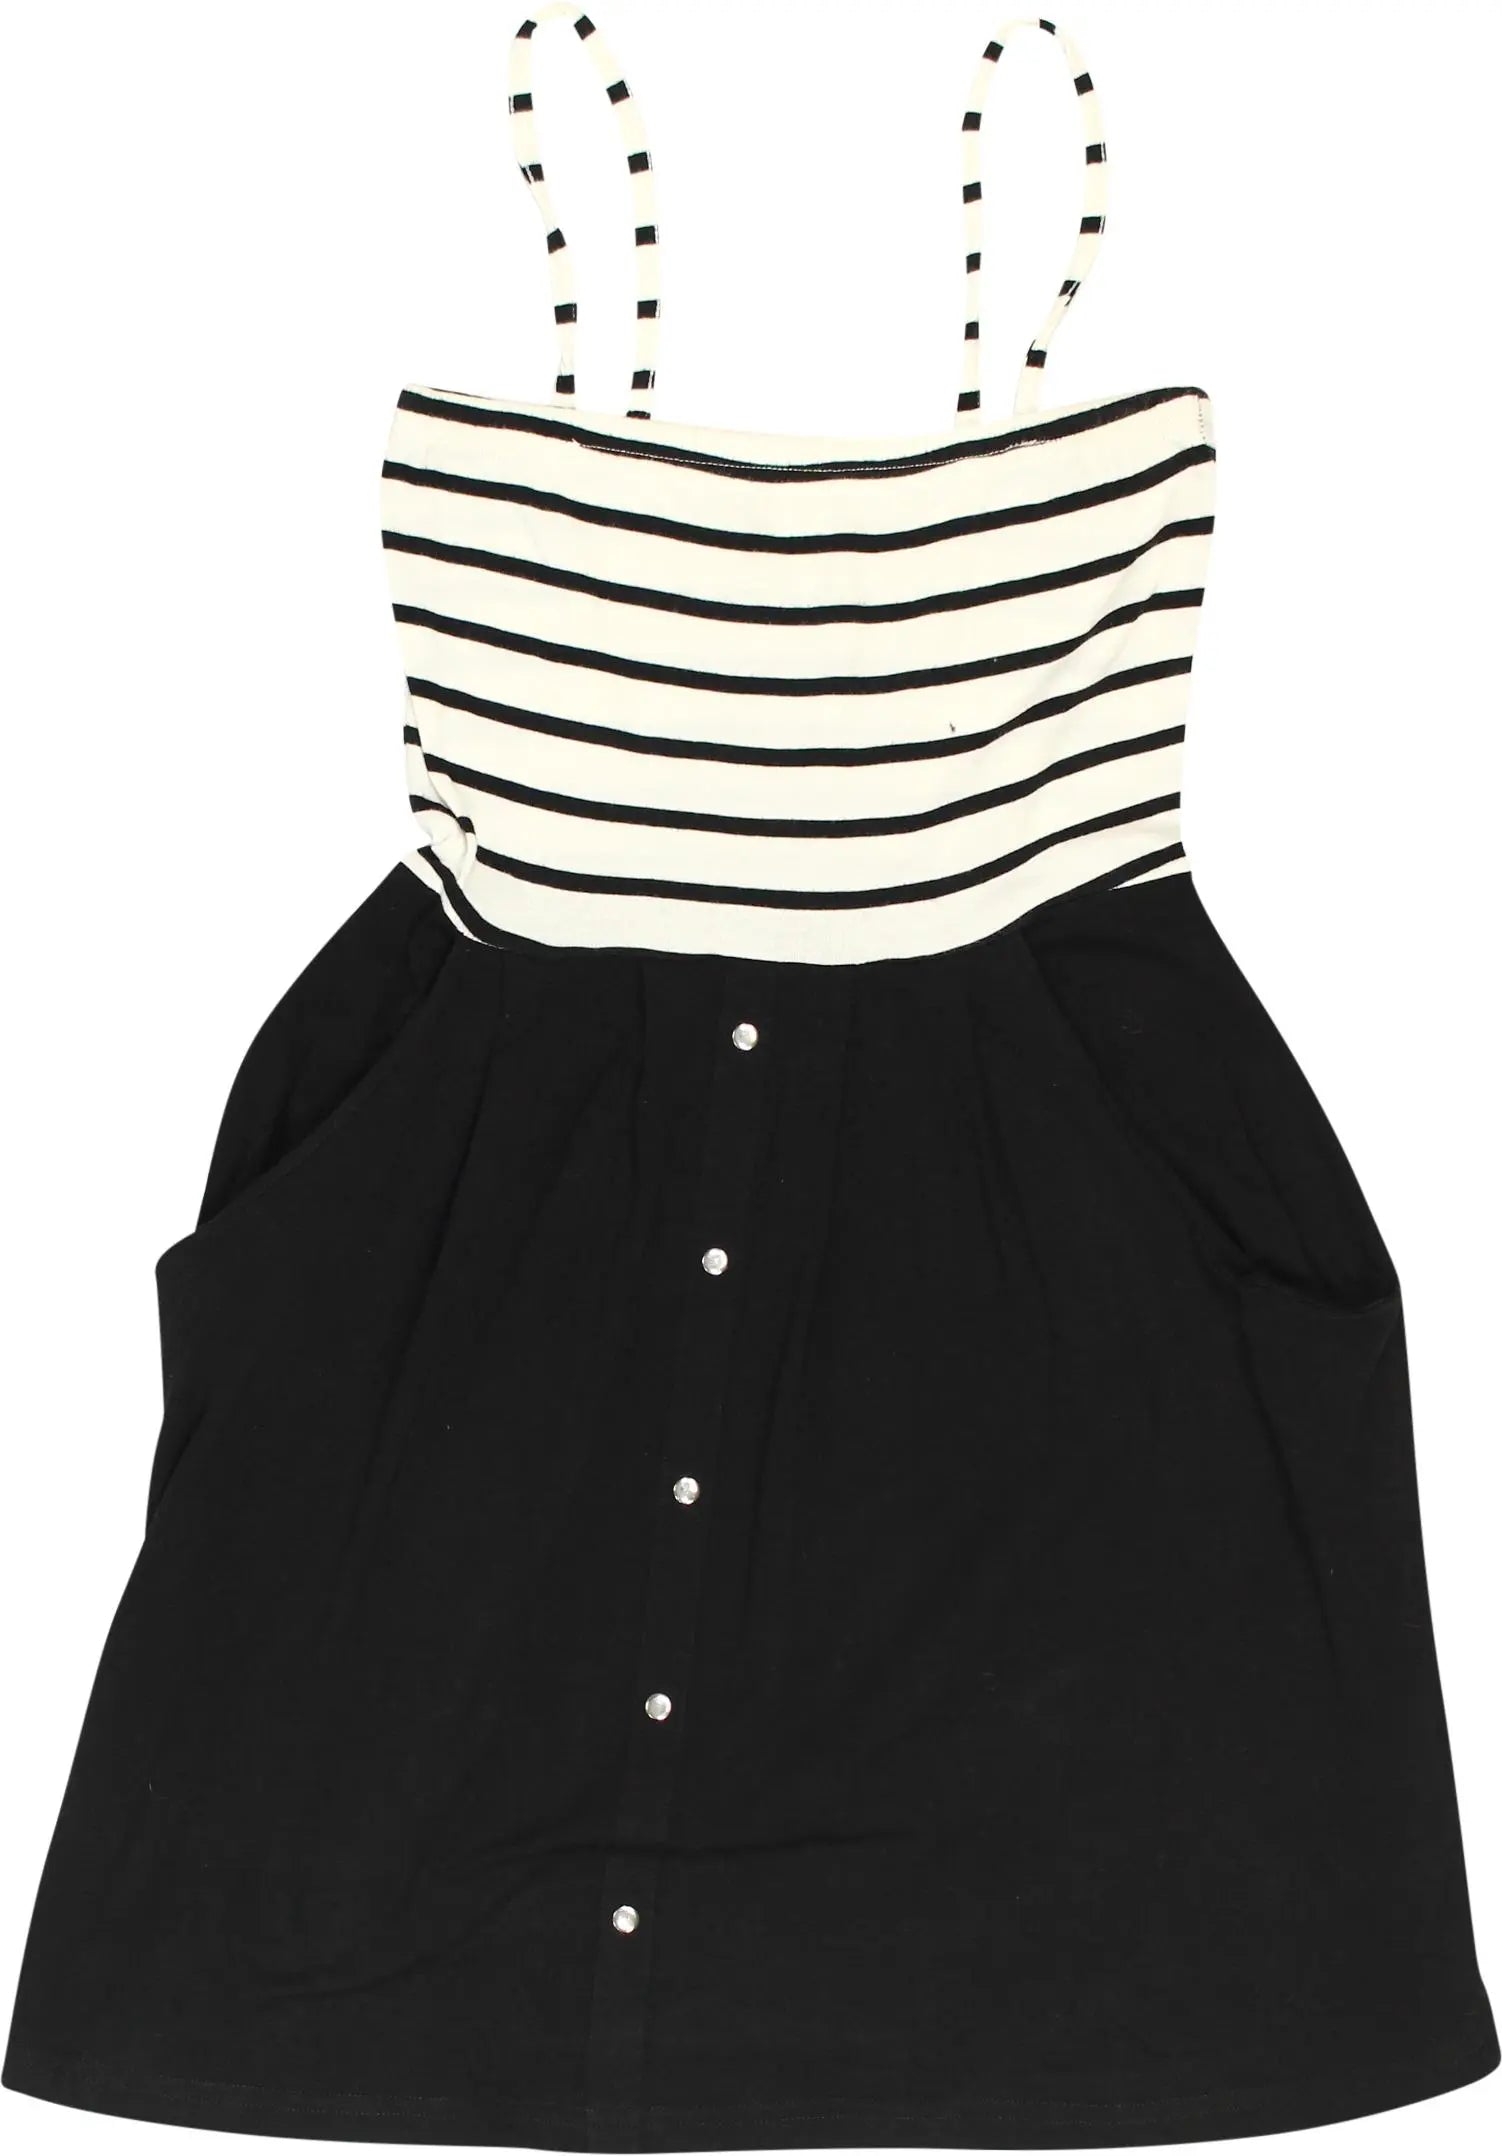 Vero Moda - Striped Dress- ThriftTale.com - Vintage and second handclothing